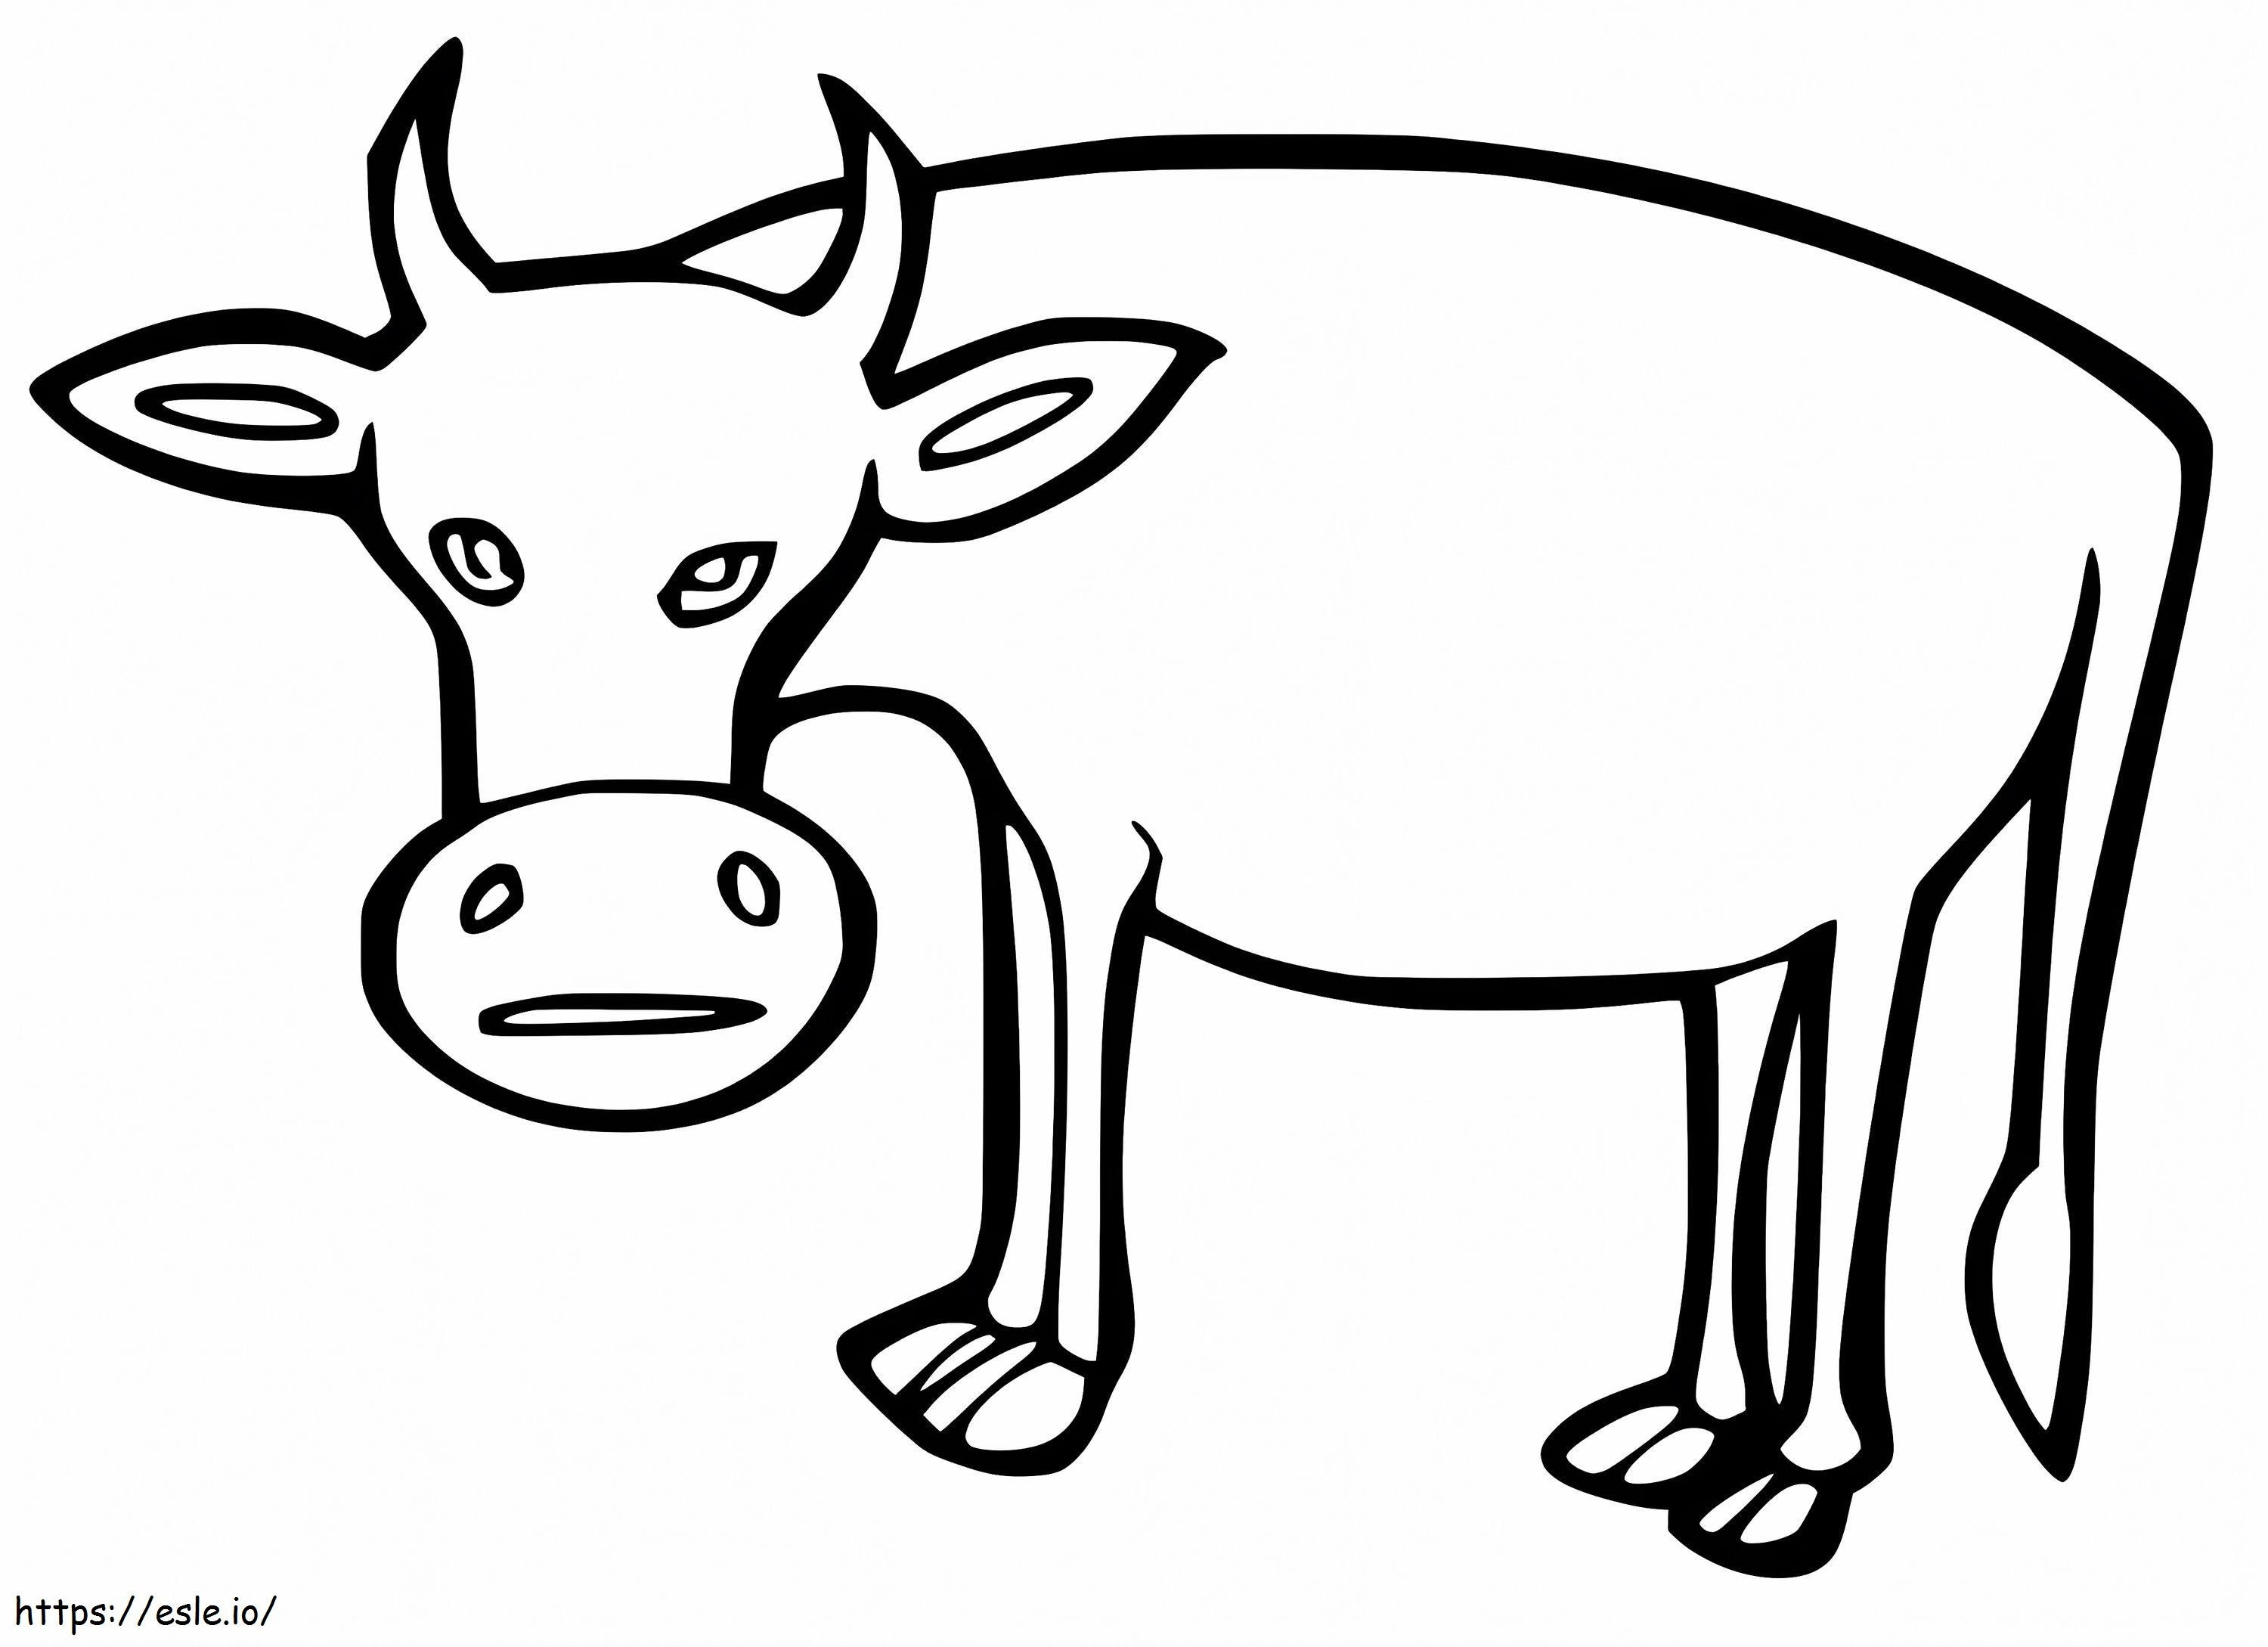 A Simple Bull coloring page